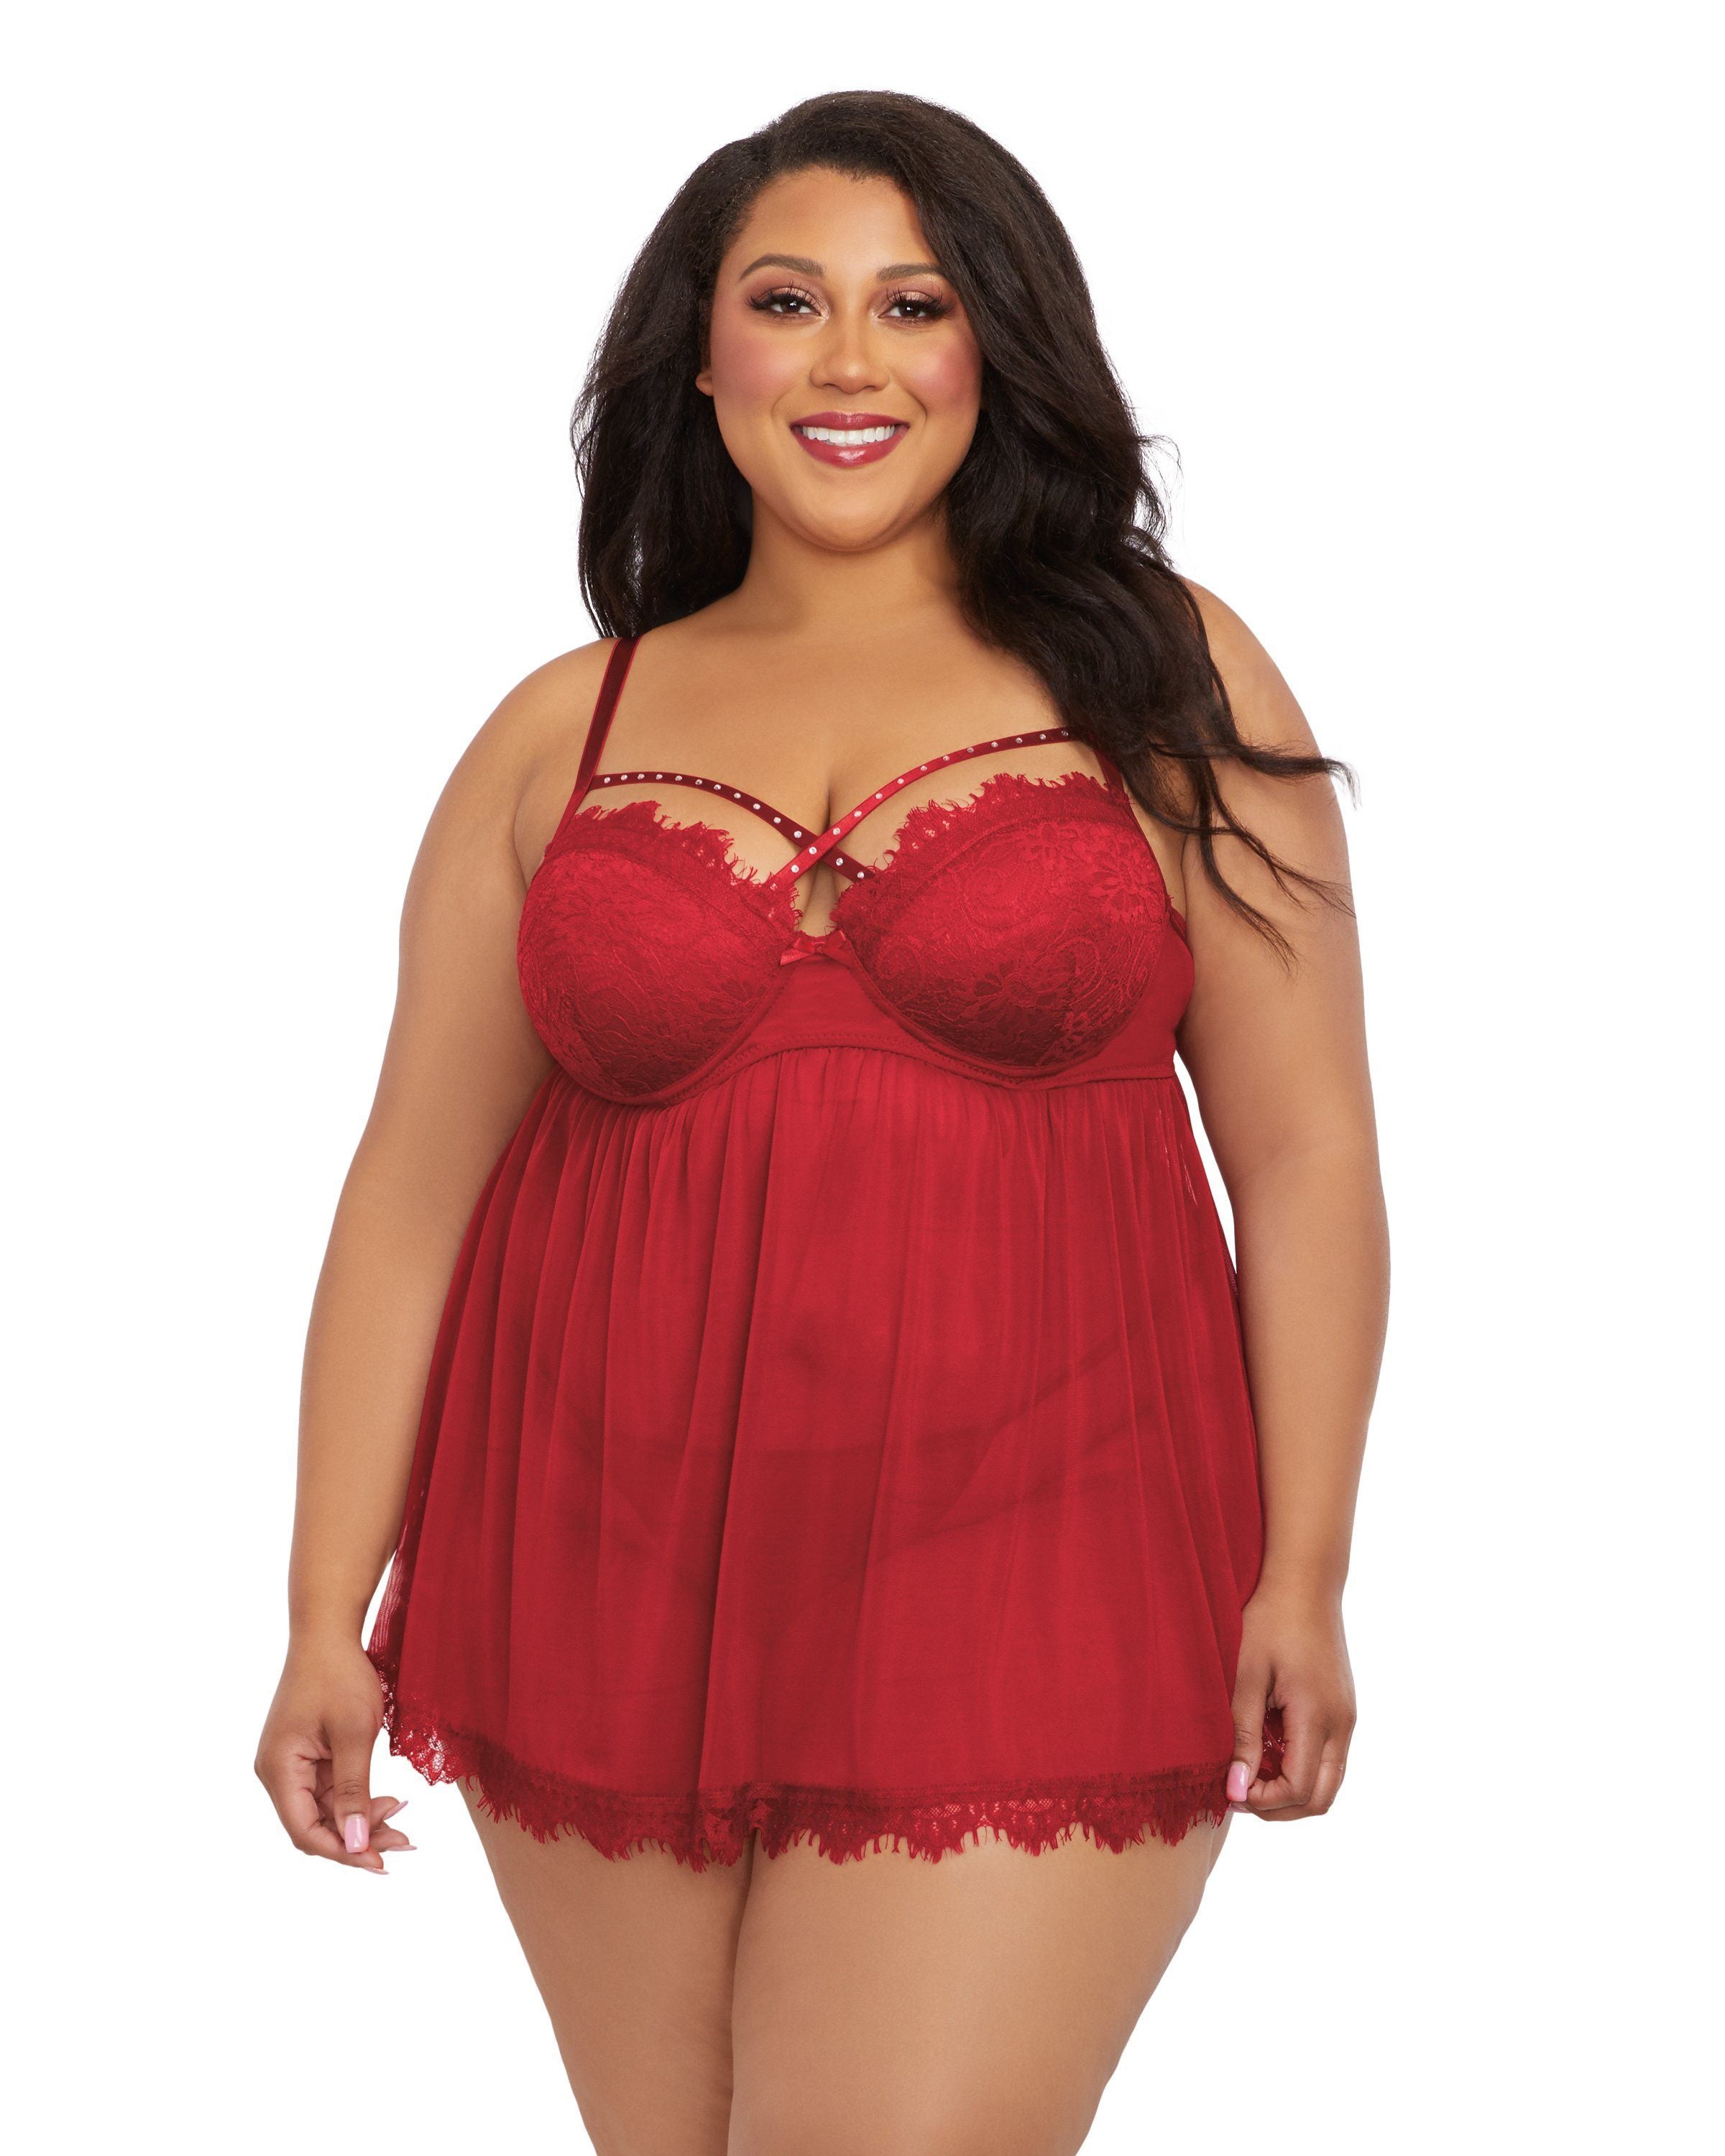 Plus Size Underwire Push Up Cup Babydoll with Stretch Mesh Skirt Dreamgirl International 